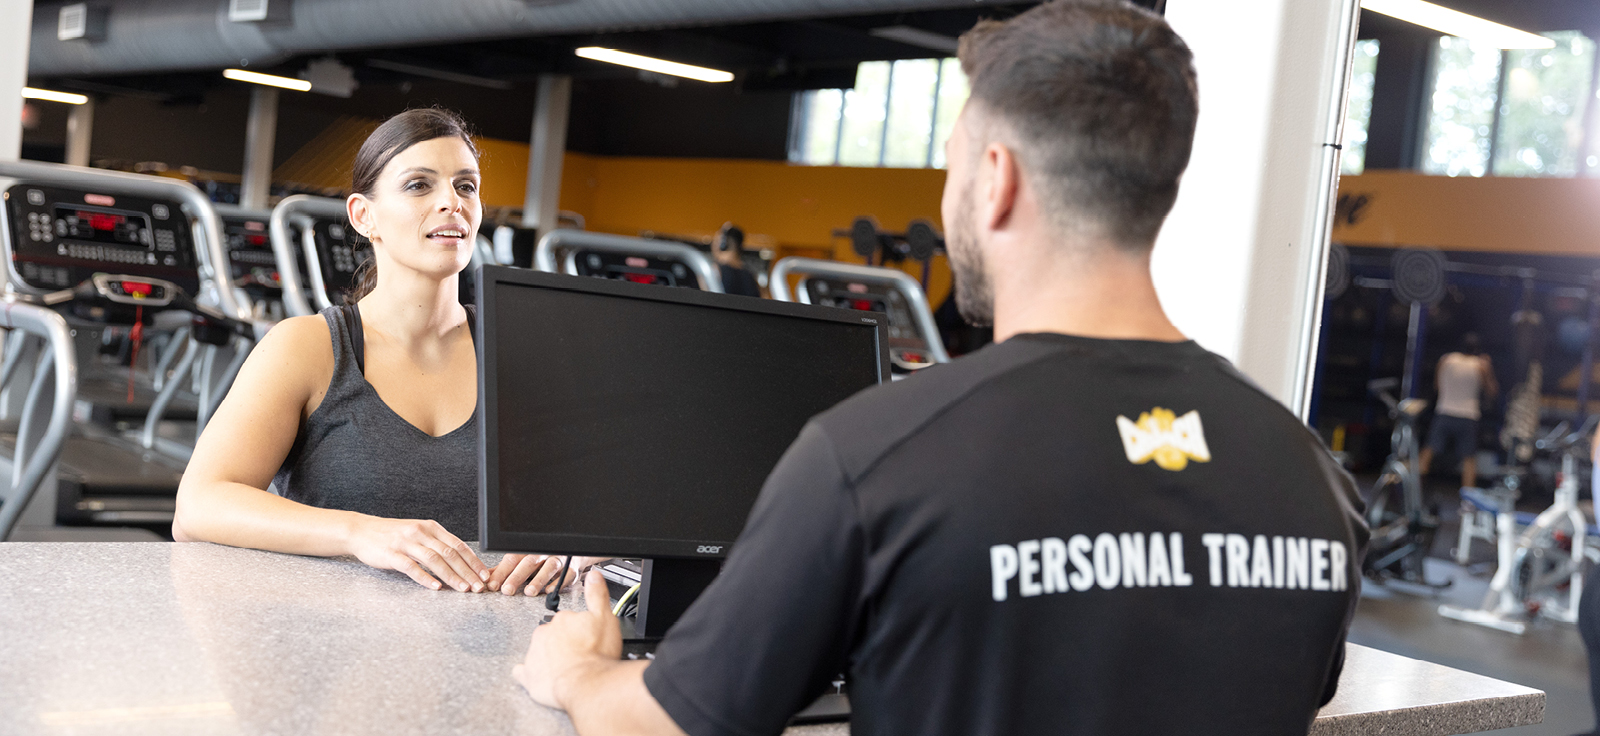 crunch personal trainer with client